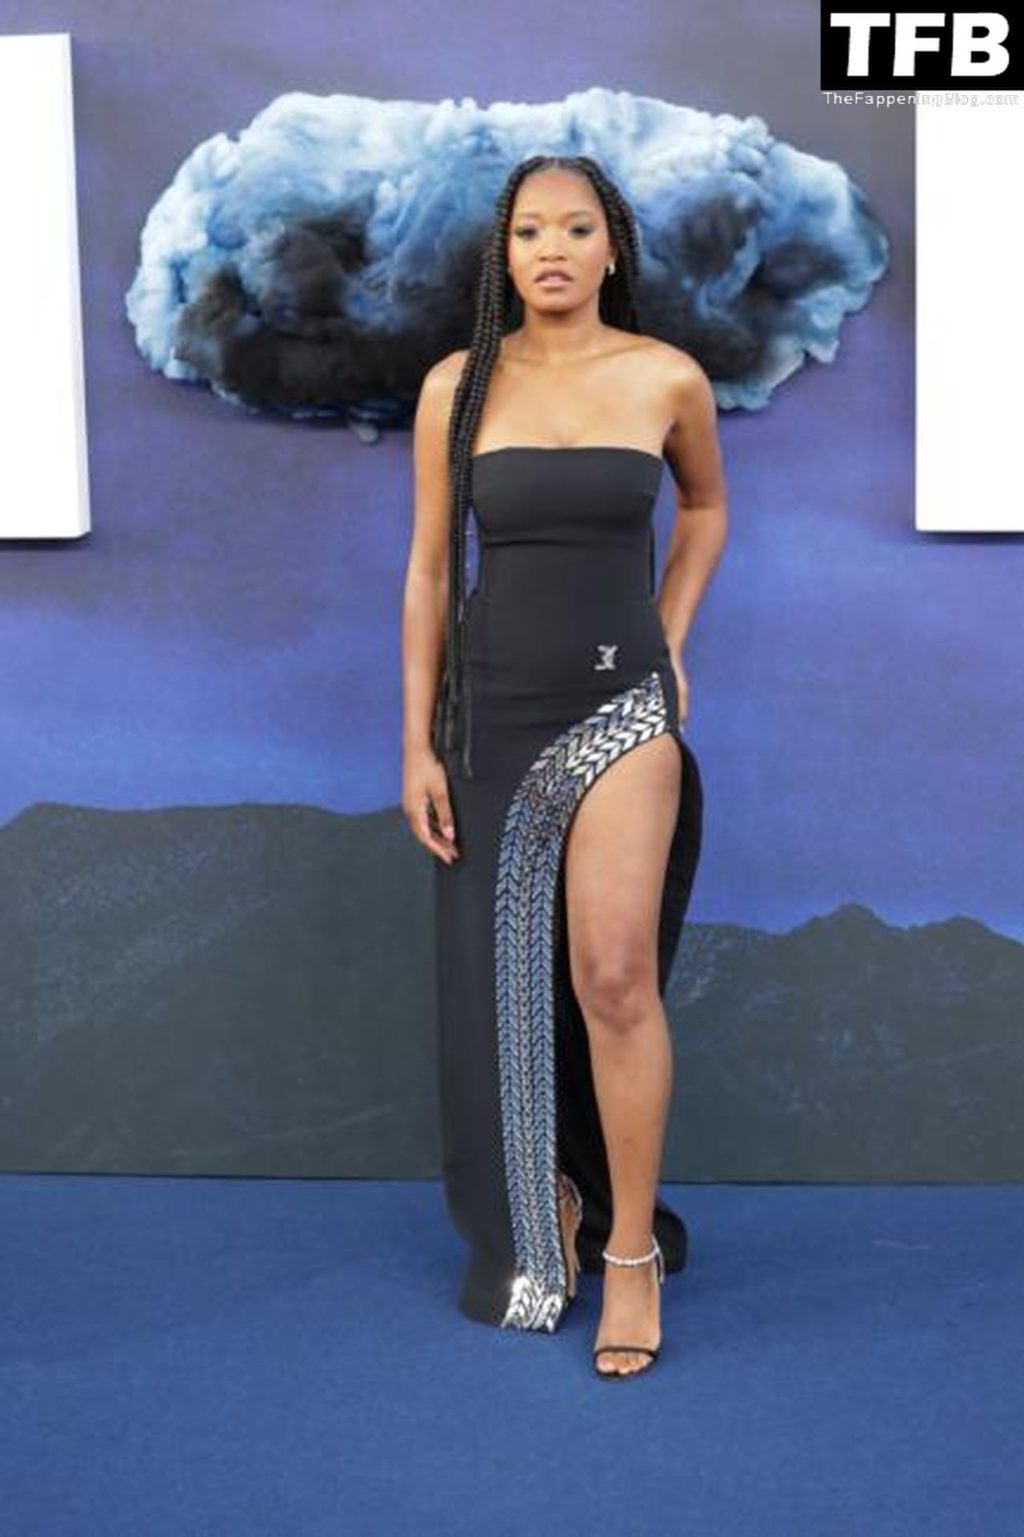 Keke Palmer Looks Stunning at the German Premiere of the Film “Nope” (60 Photos)